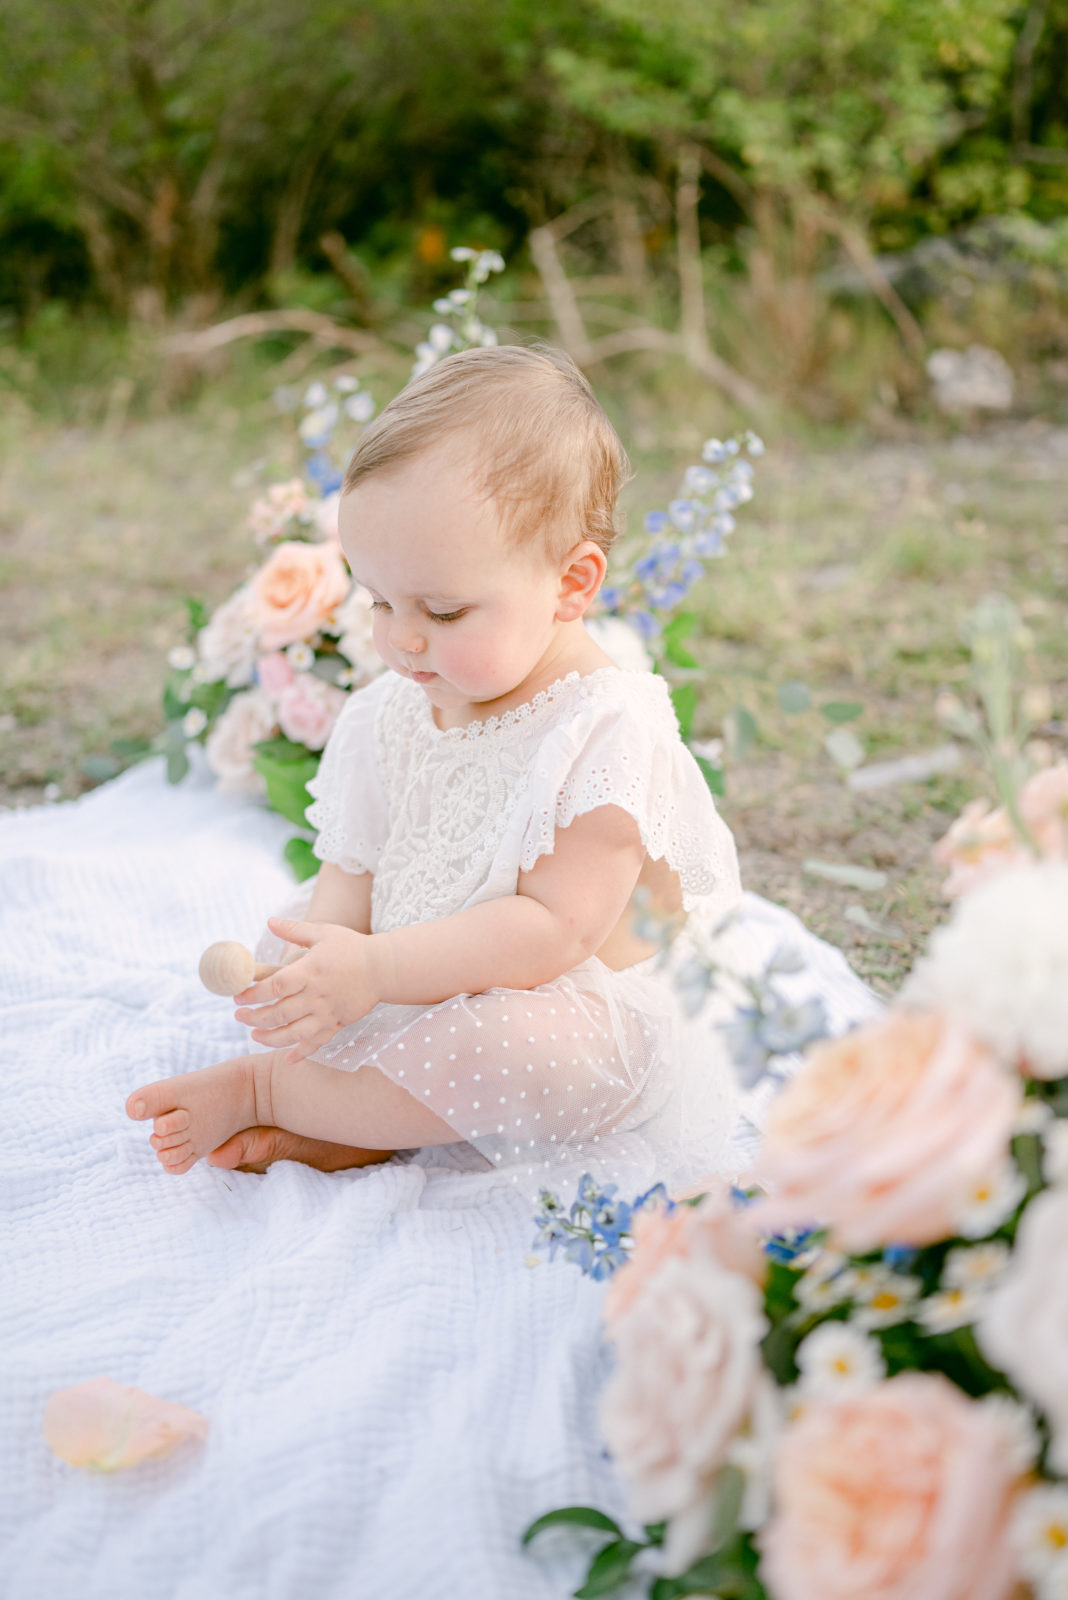 Baby photos with flowers